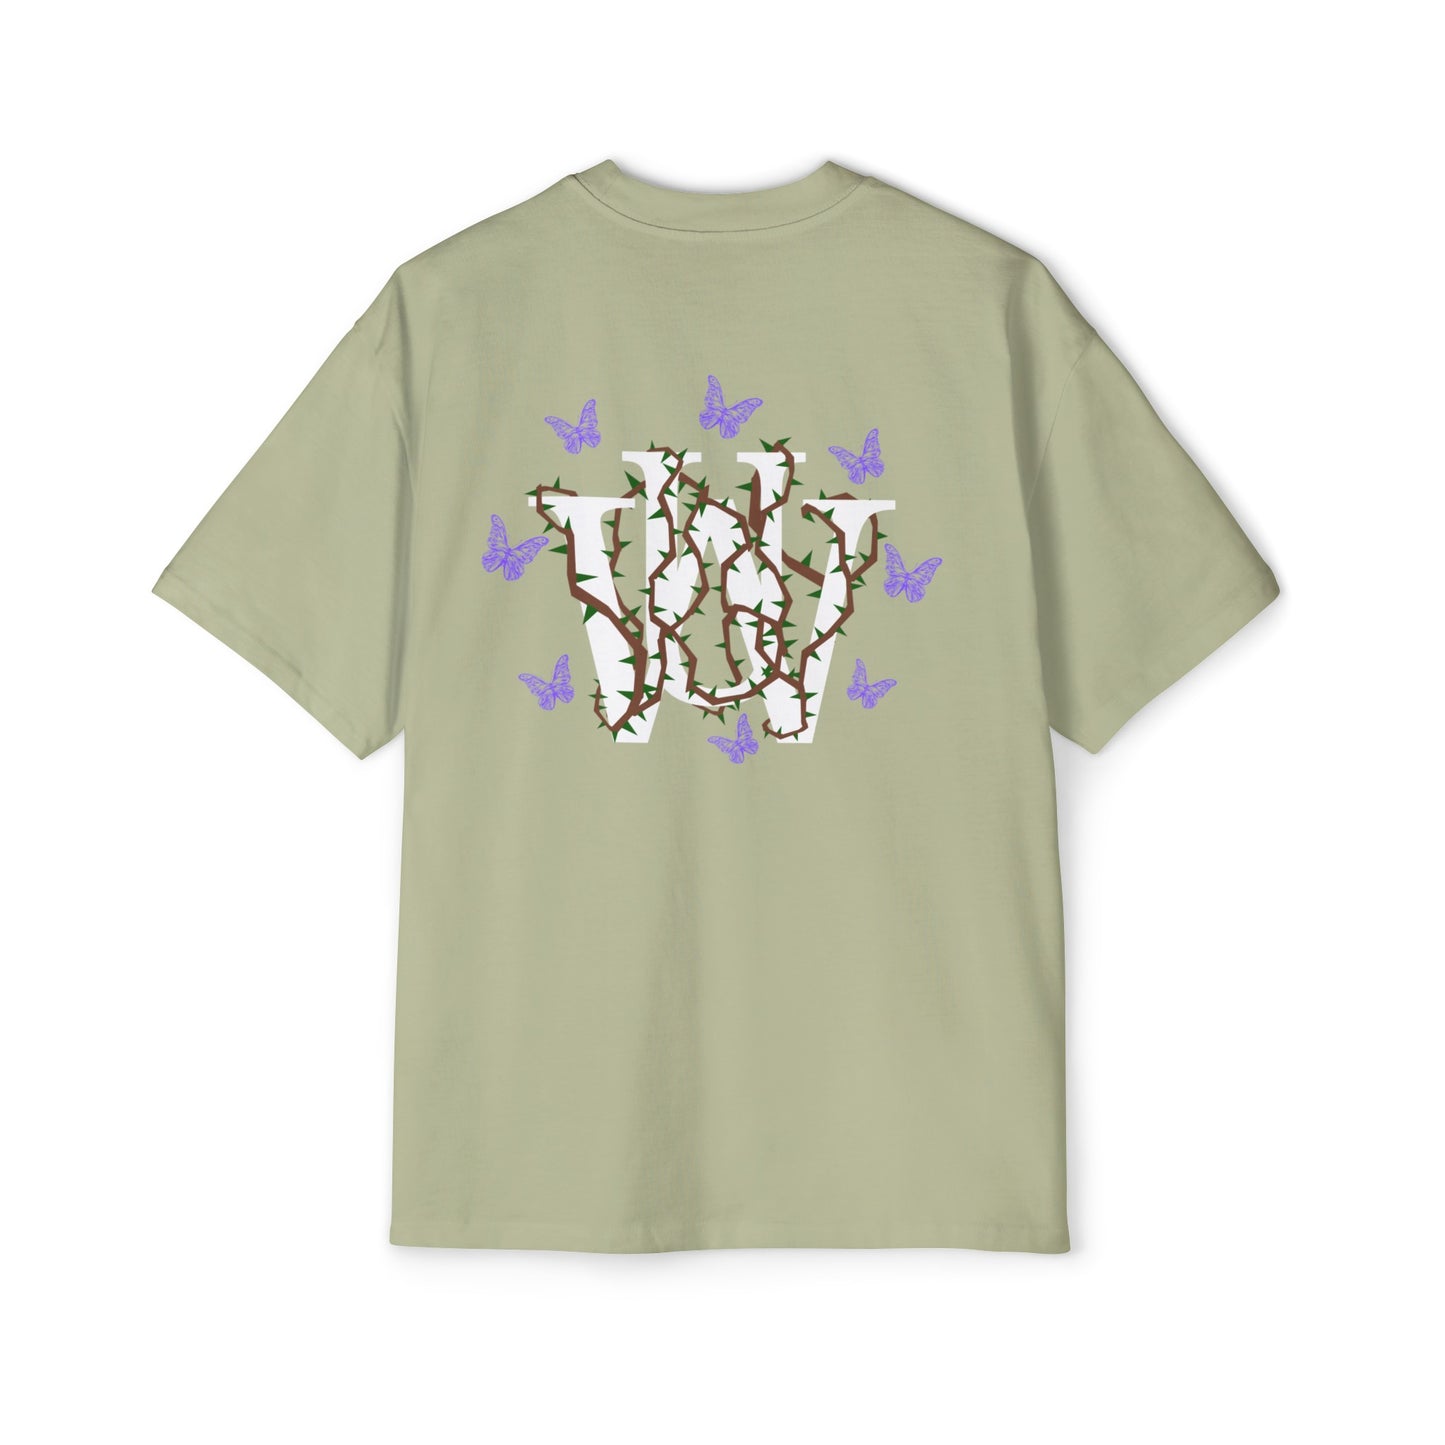 WAKE UP Butterfly Effect Heavy Oversized Tee (Remastered)